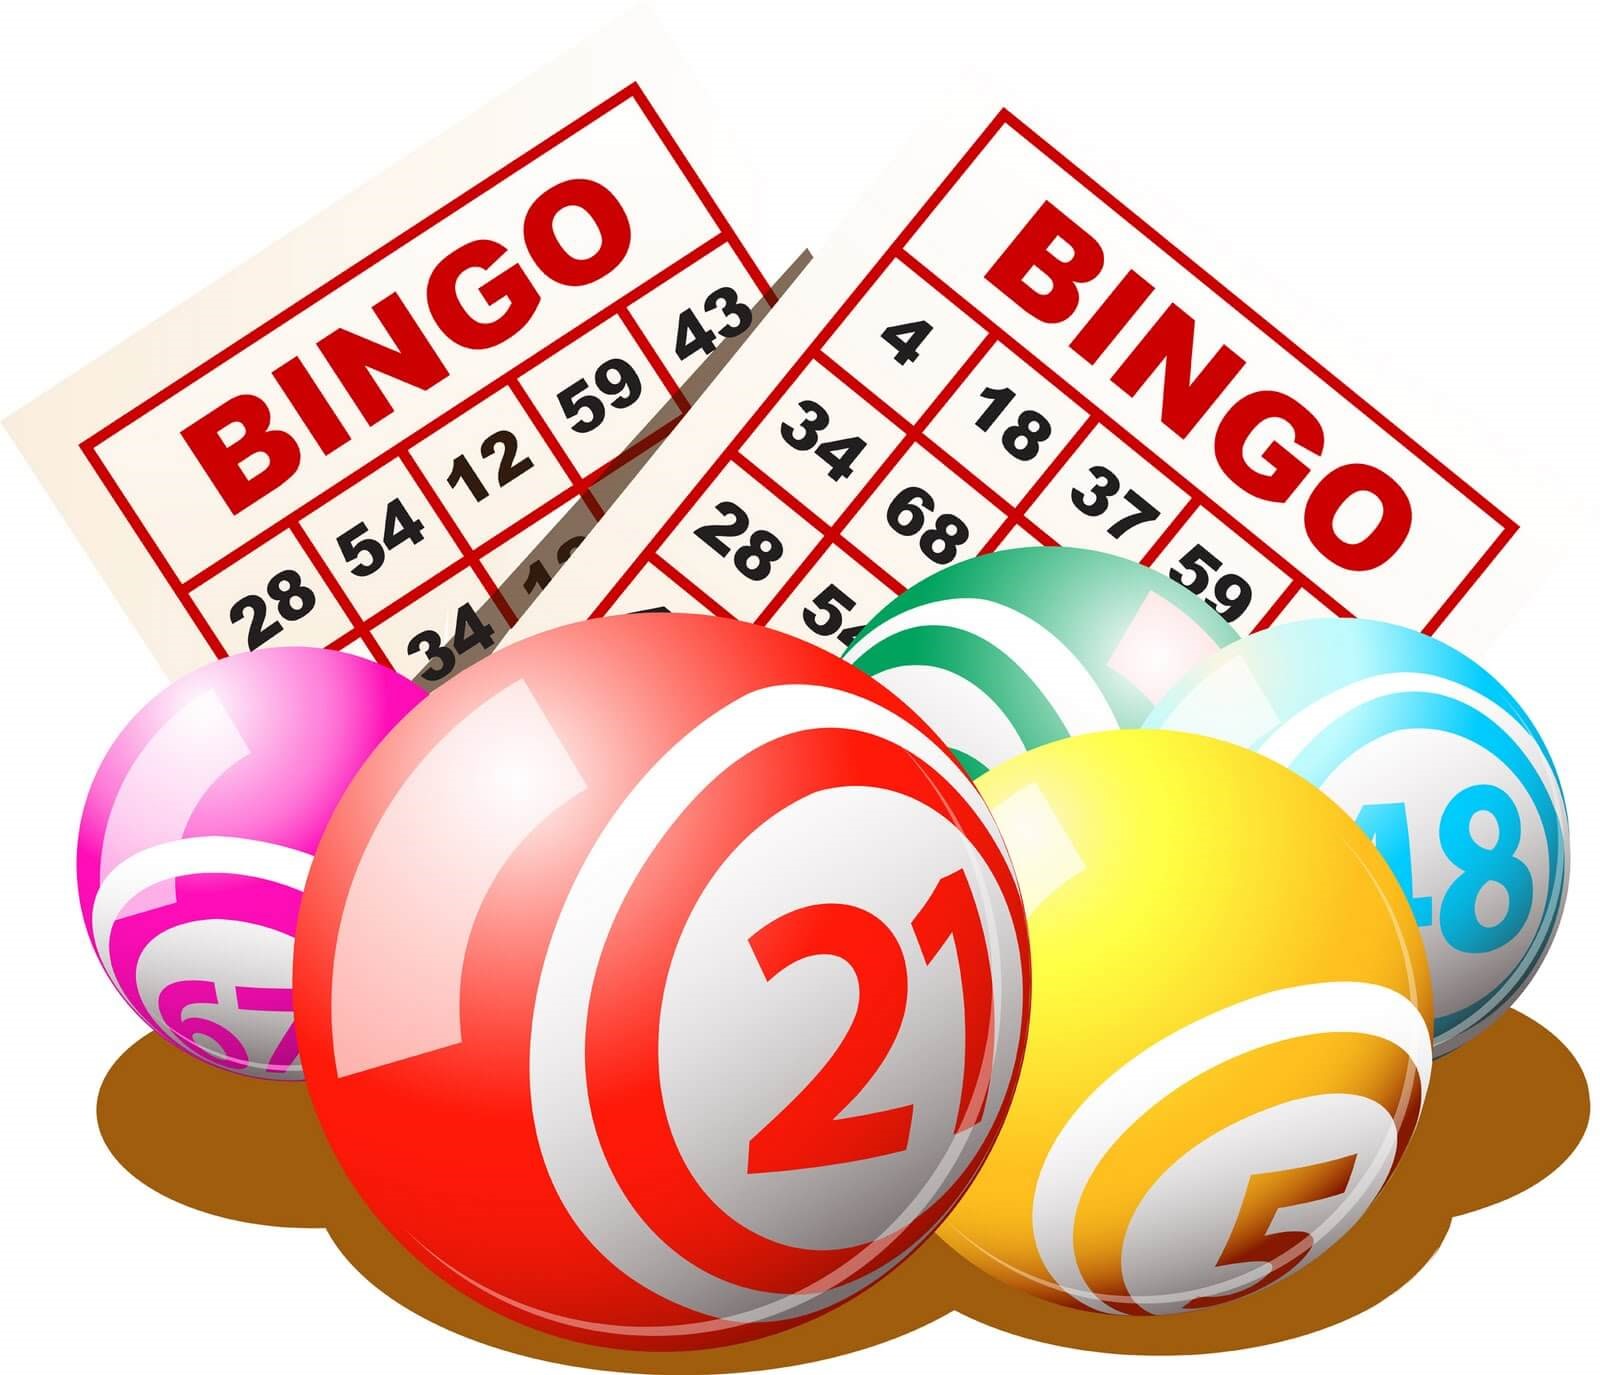 Fun Thursday with our monthly Bingo